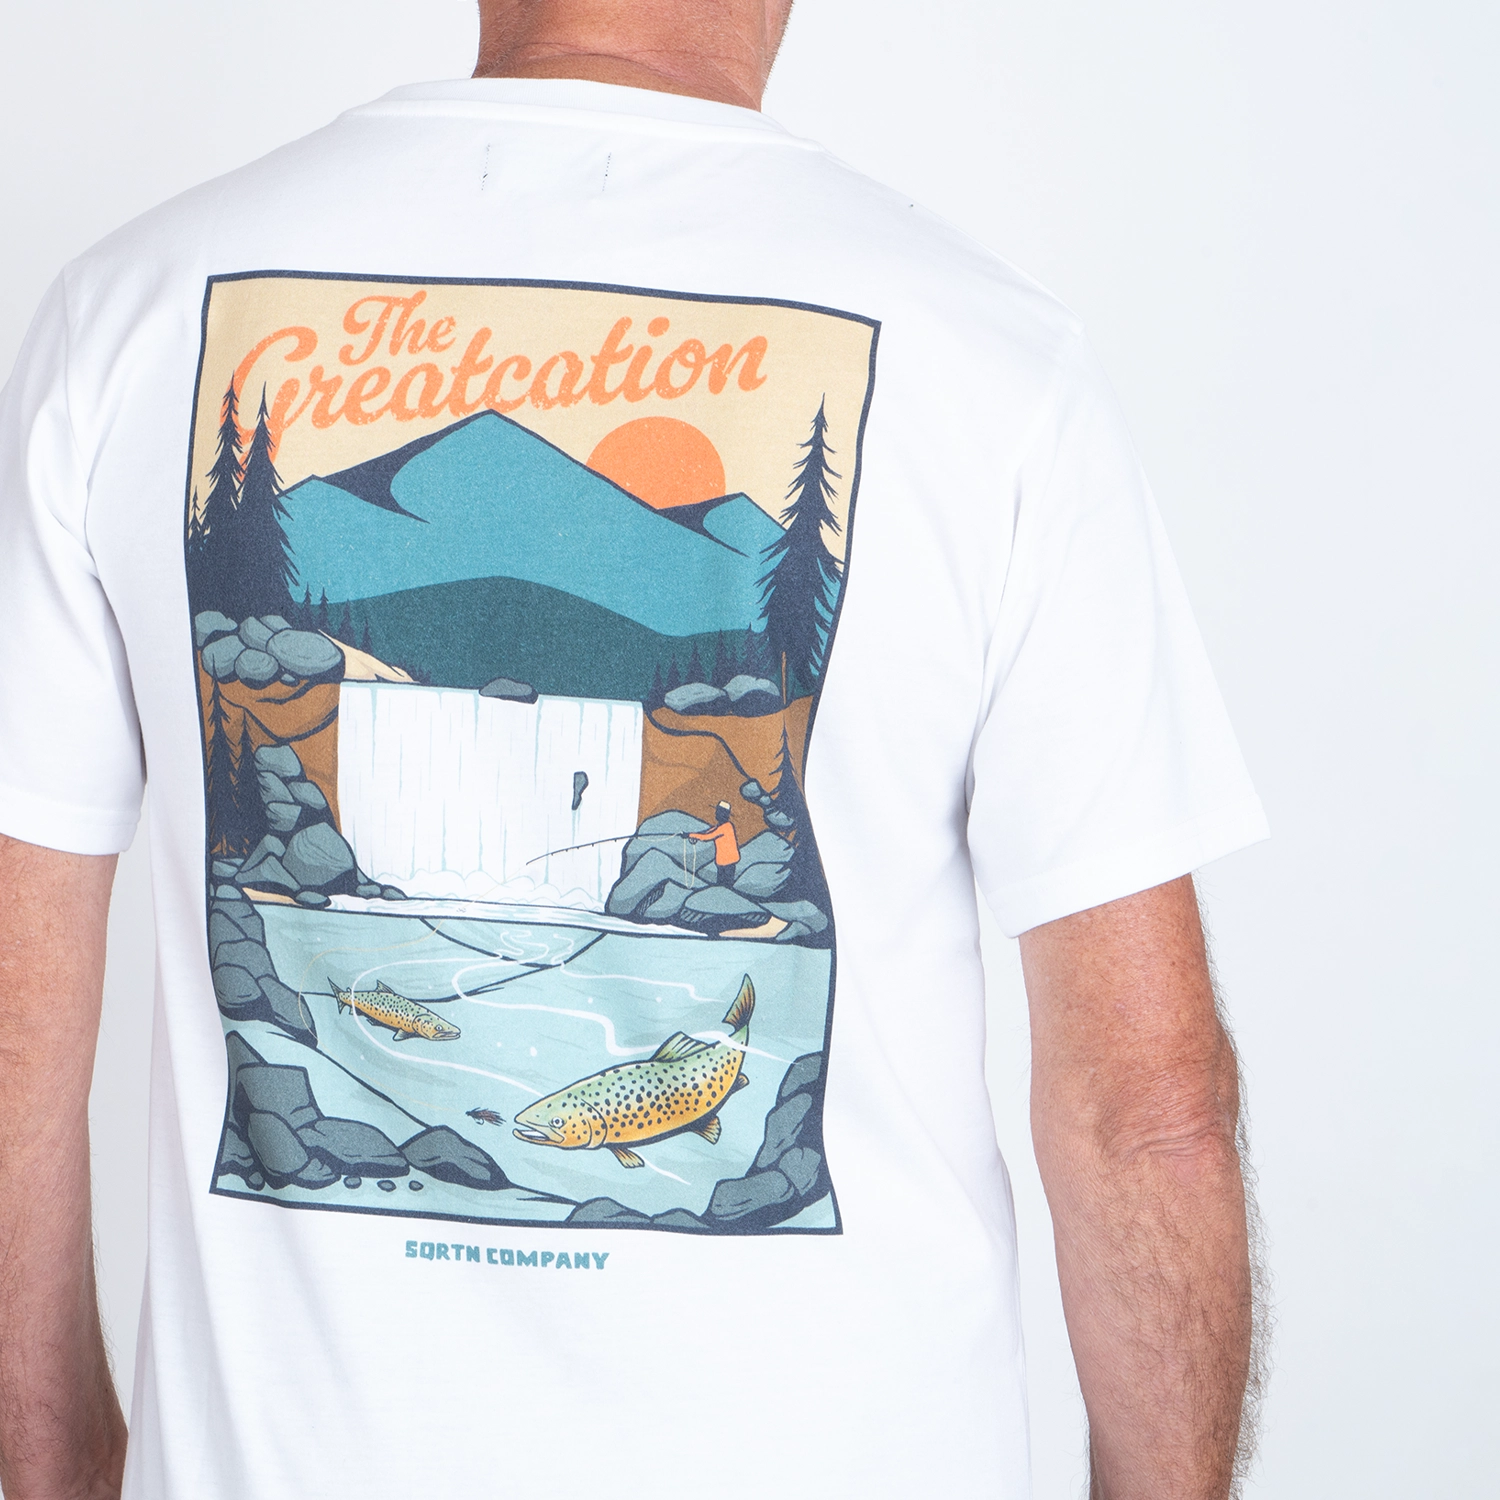 Greatcation T-shirt